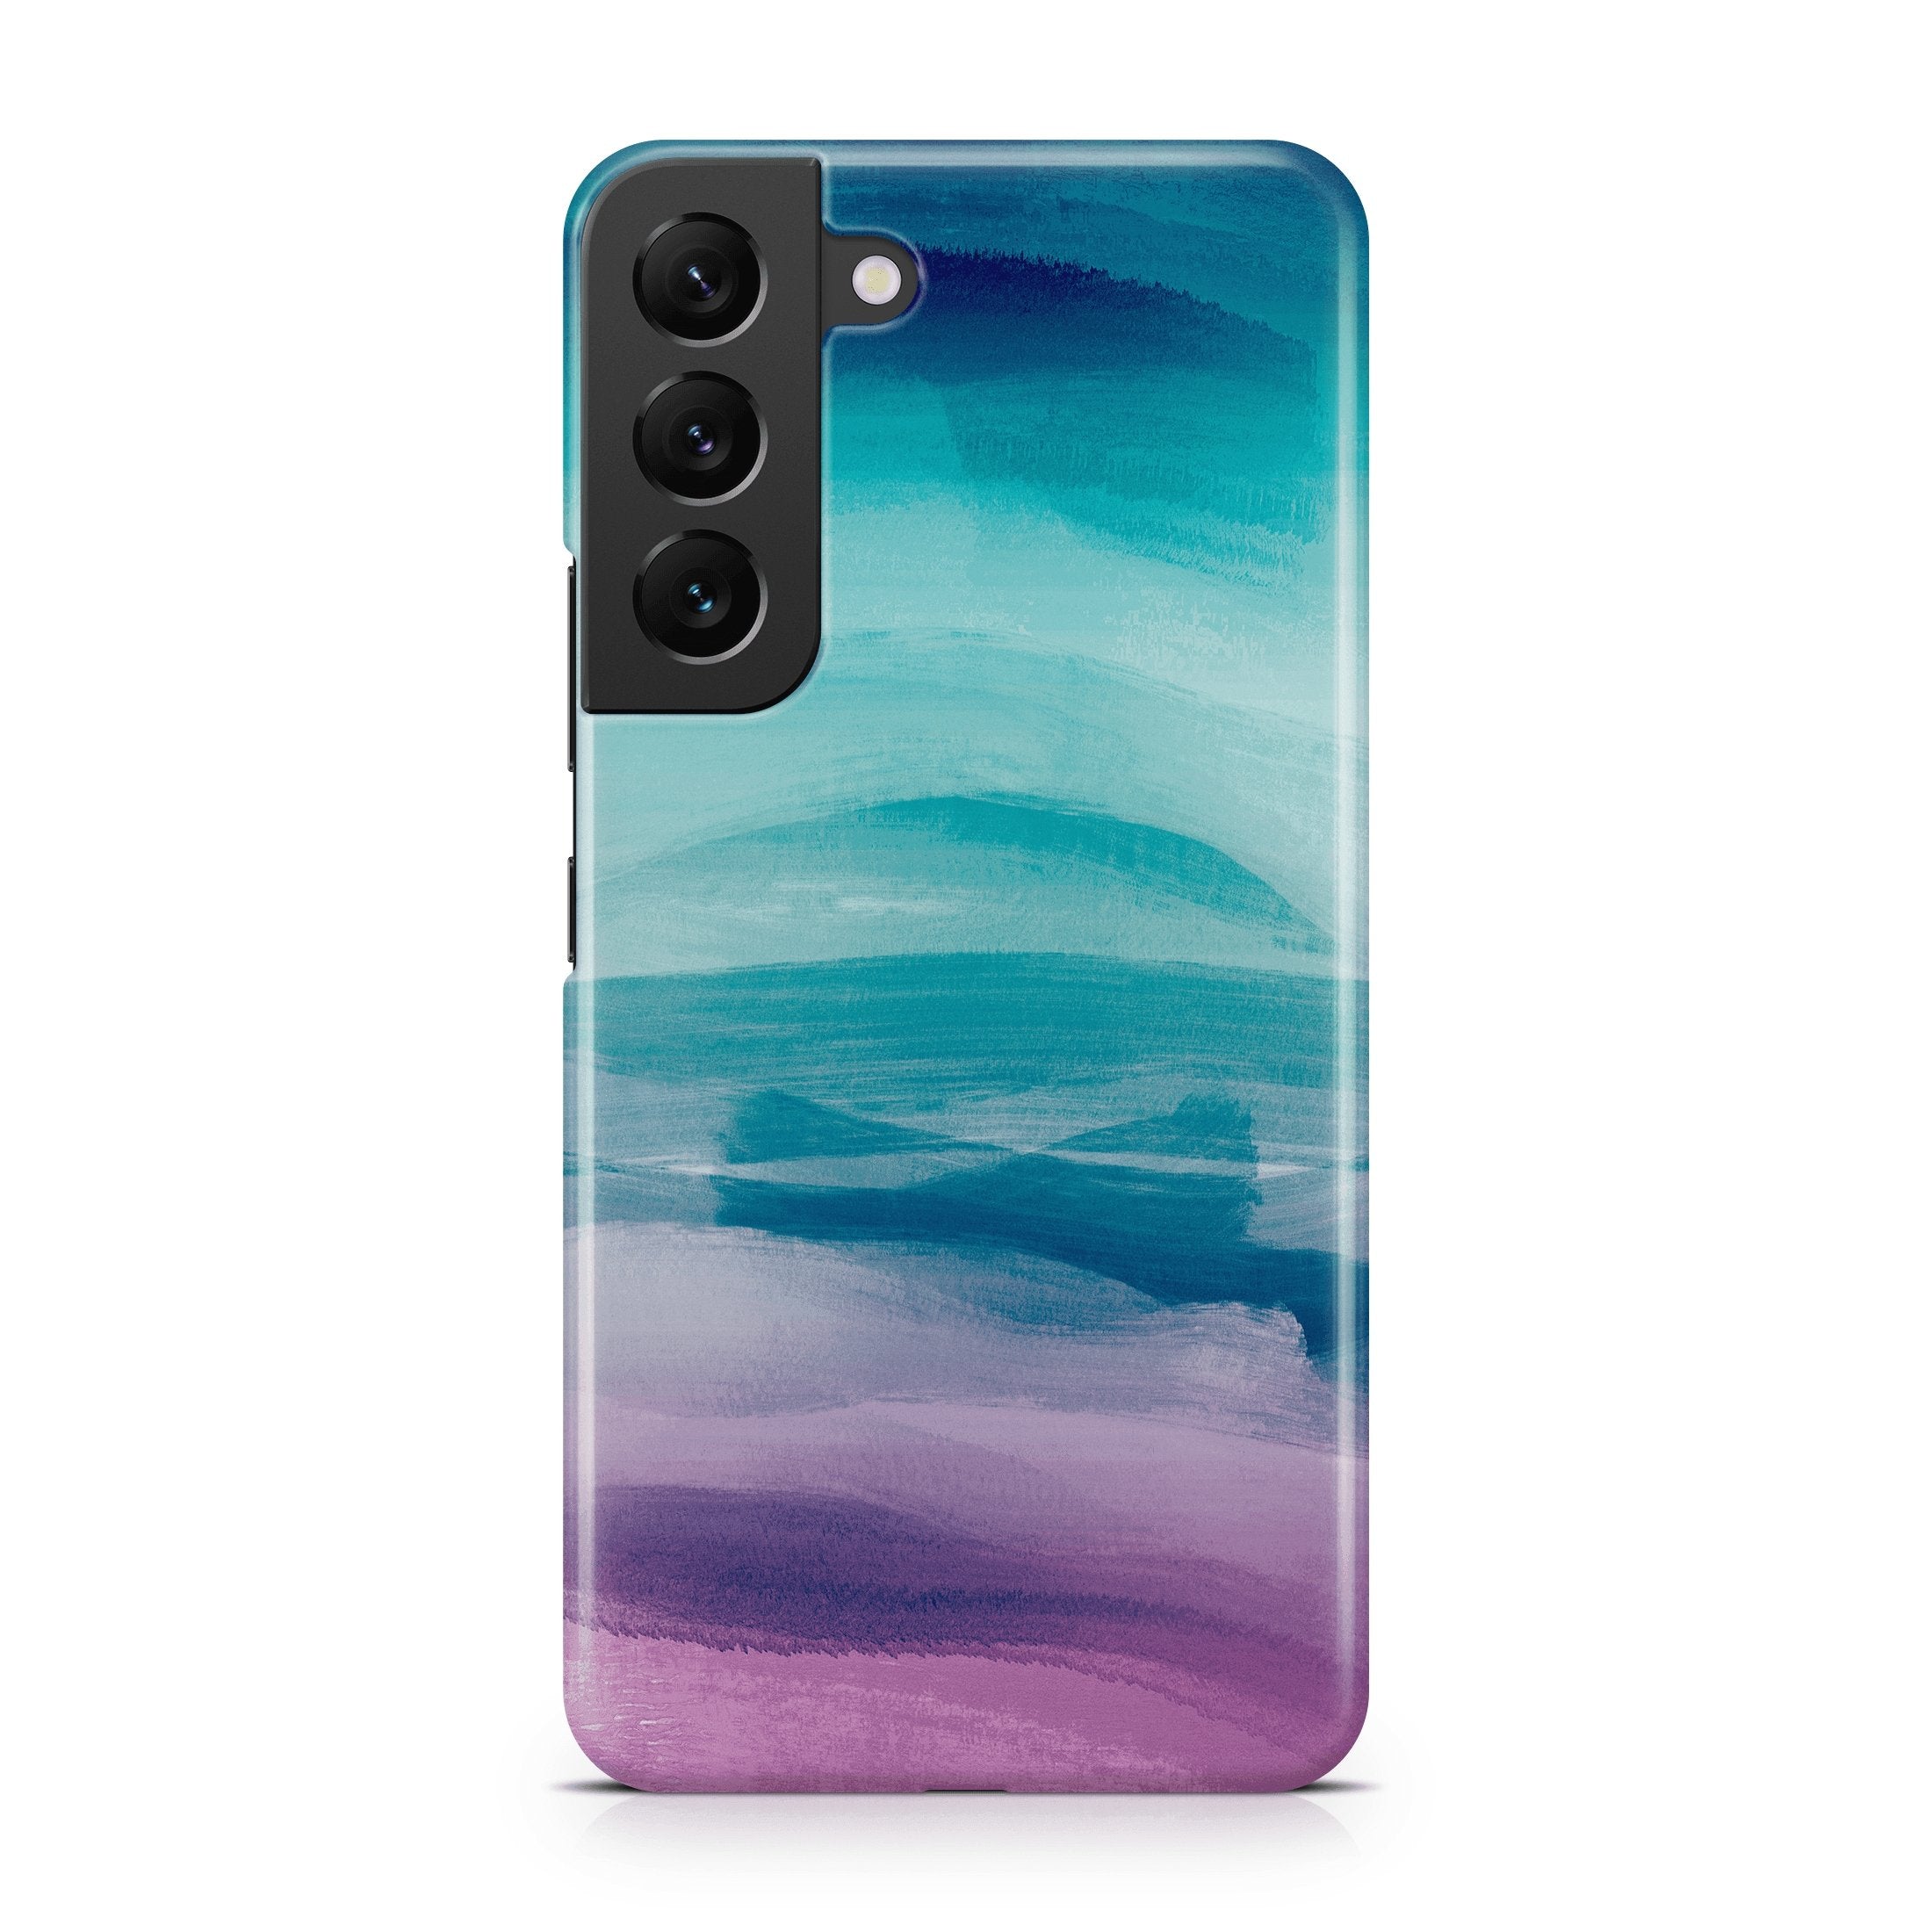 Into the Night Ombre - Samsung phone case designs by CaseSwagger